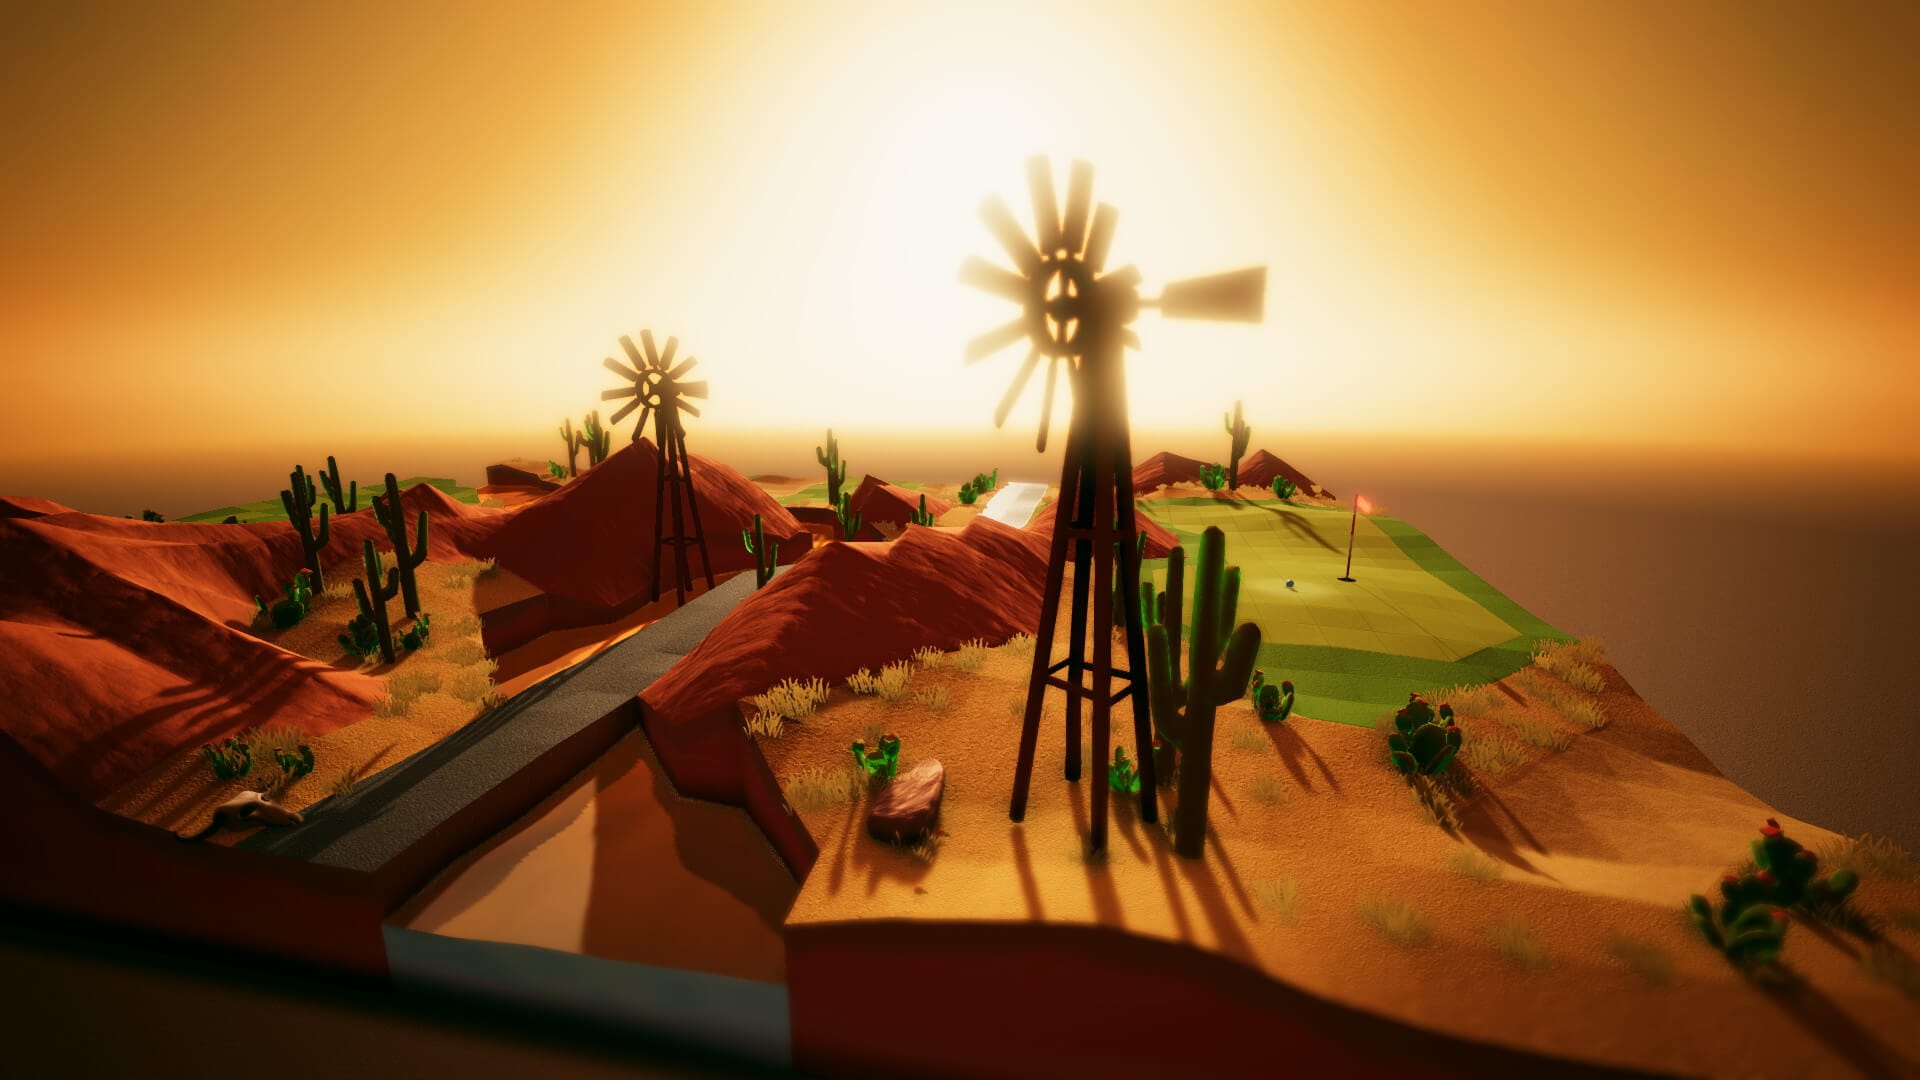 A golf course at sunset in the new Playtonic Friends title A Little Golf Journey